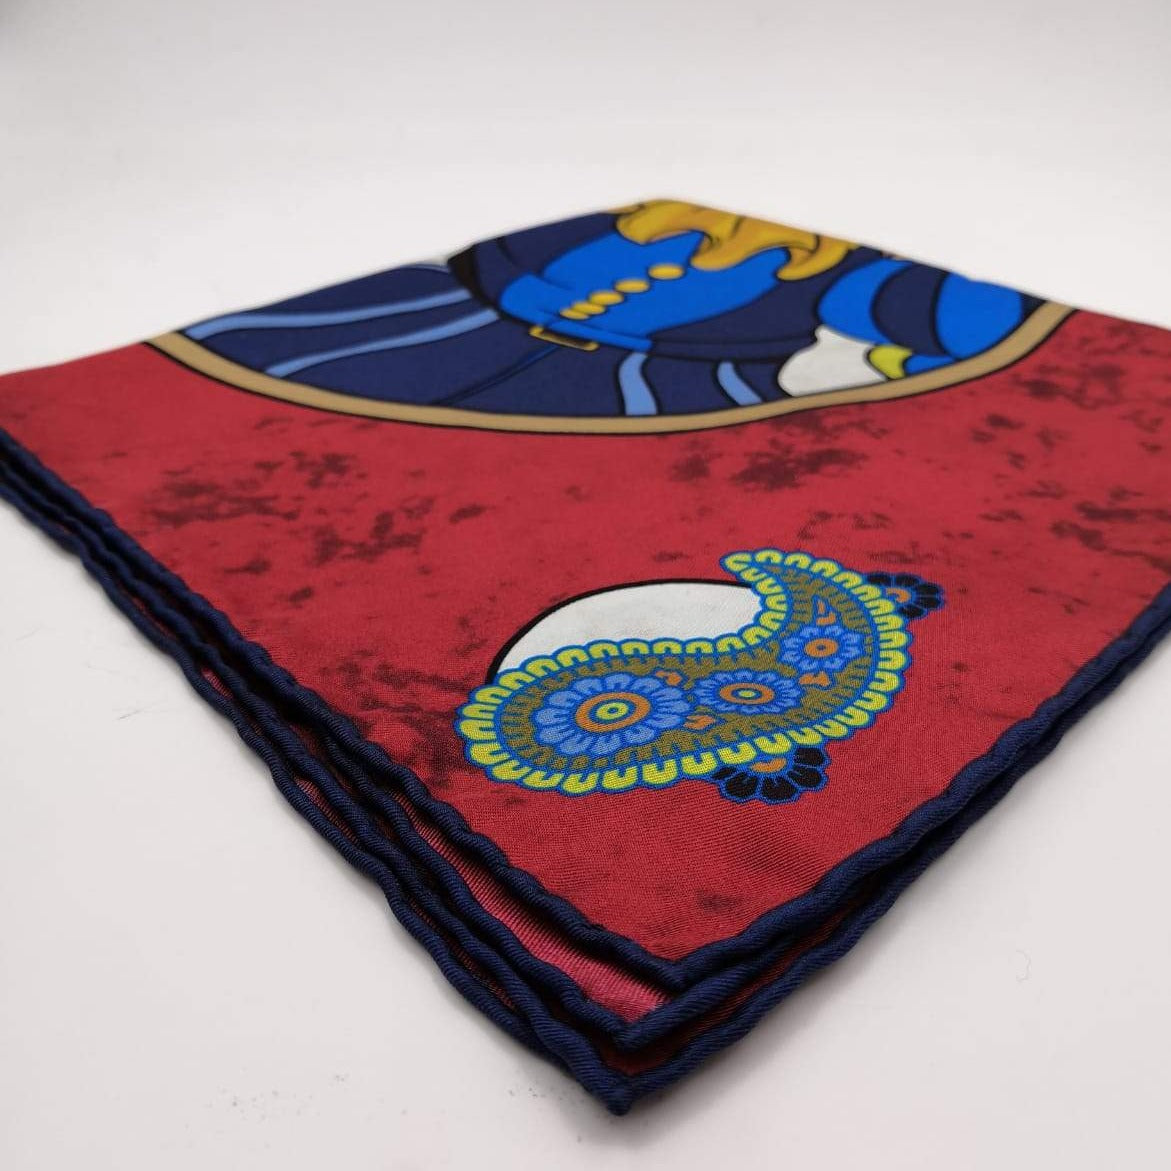 Cruciani & Bella 100% Silk Hand-rolled  Red and Multicolor Joker  Motif  Pocket Square Handmade in Italy 39 cm X 39cm #3829